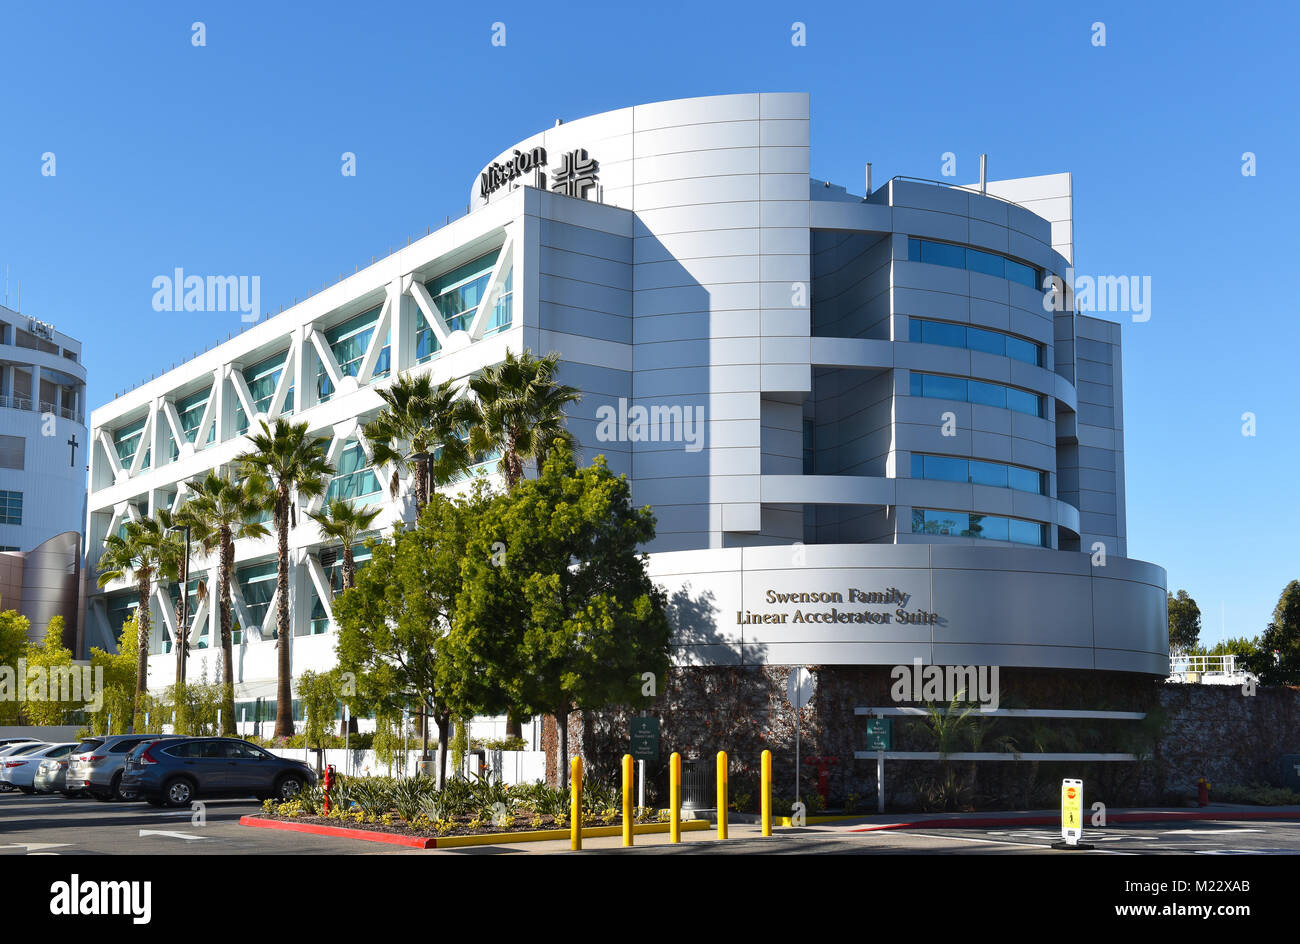 MISSION VIEJO, CA - JANUARY 23, 2018: Swenson Family Linear Accelerator Suite at Mission Hospital, Mission Viejo, California. Stock Photo